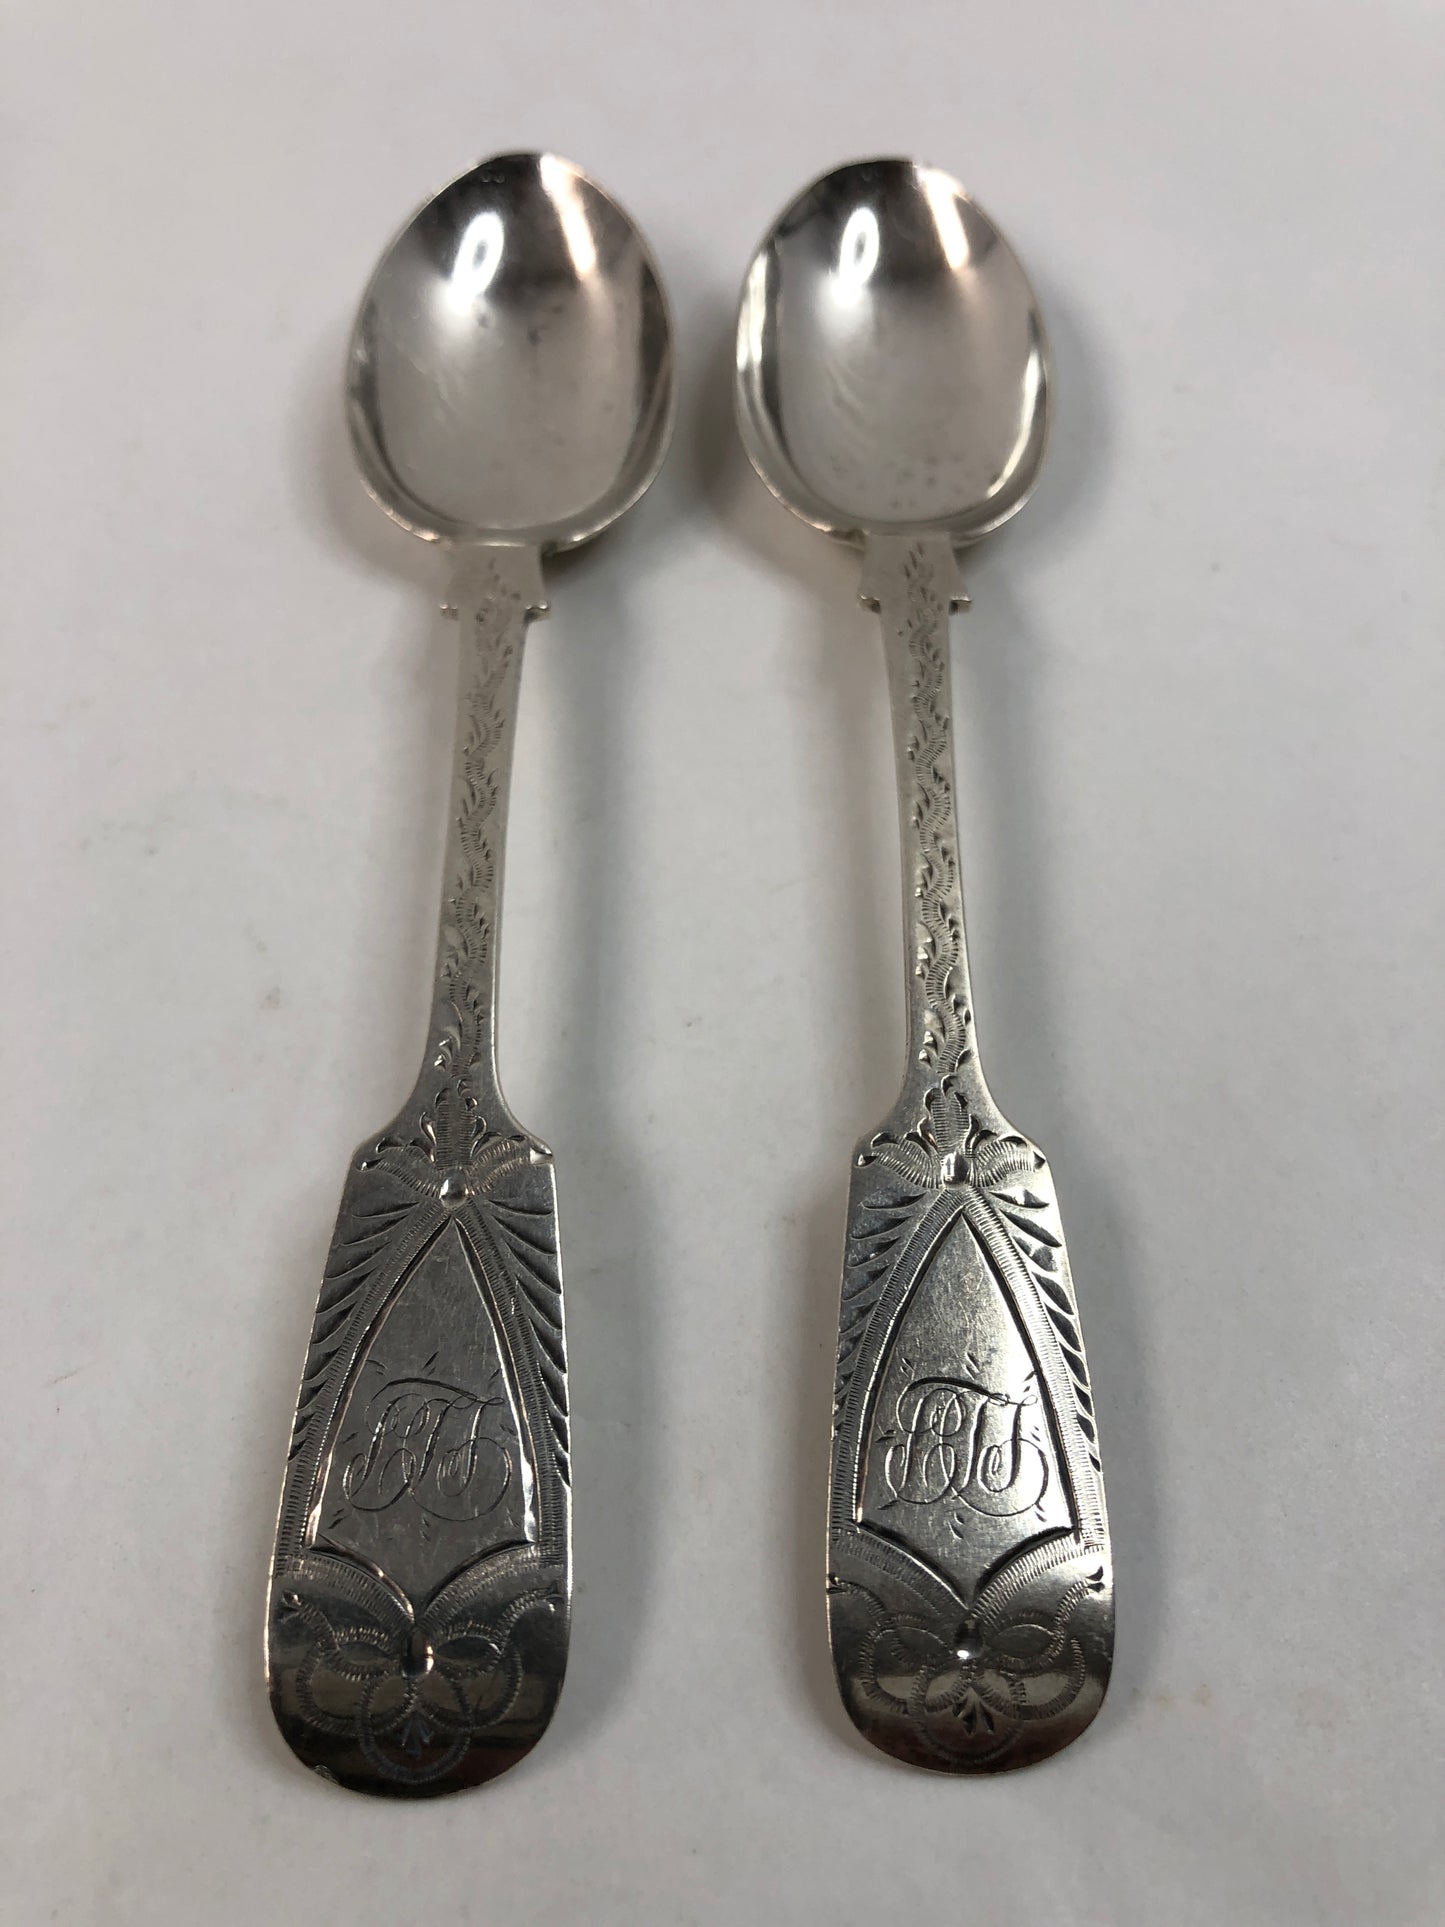 
                  
                    Stirling Silver Tea Spoons c1887 (16263)
                  
                